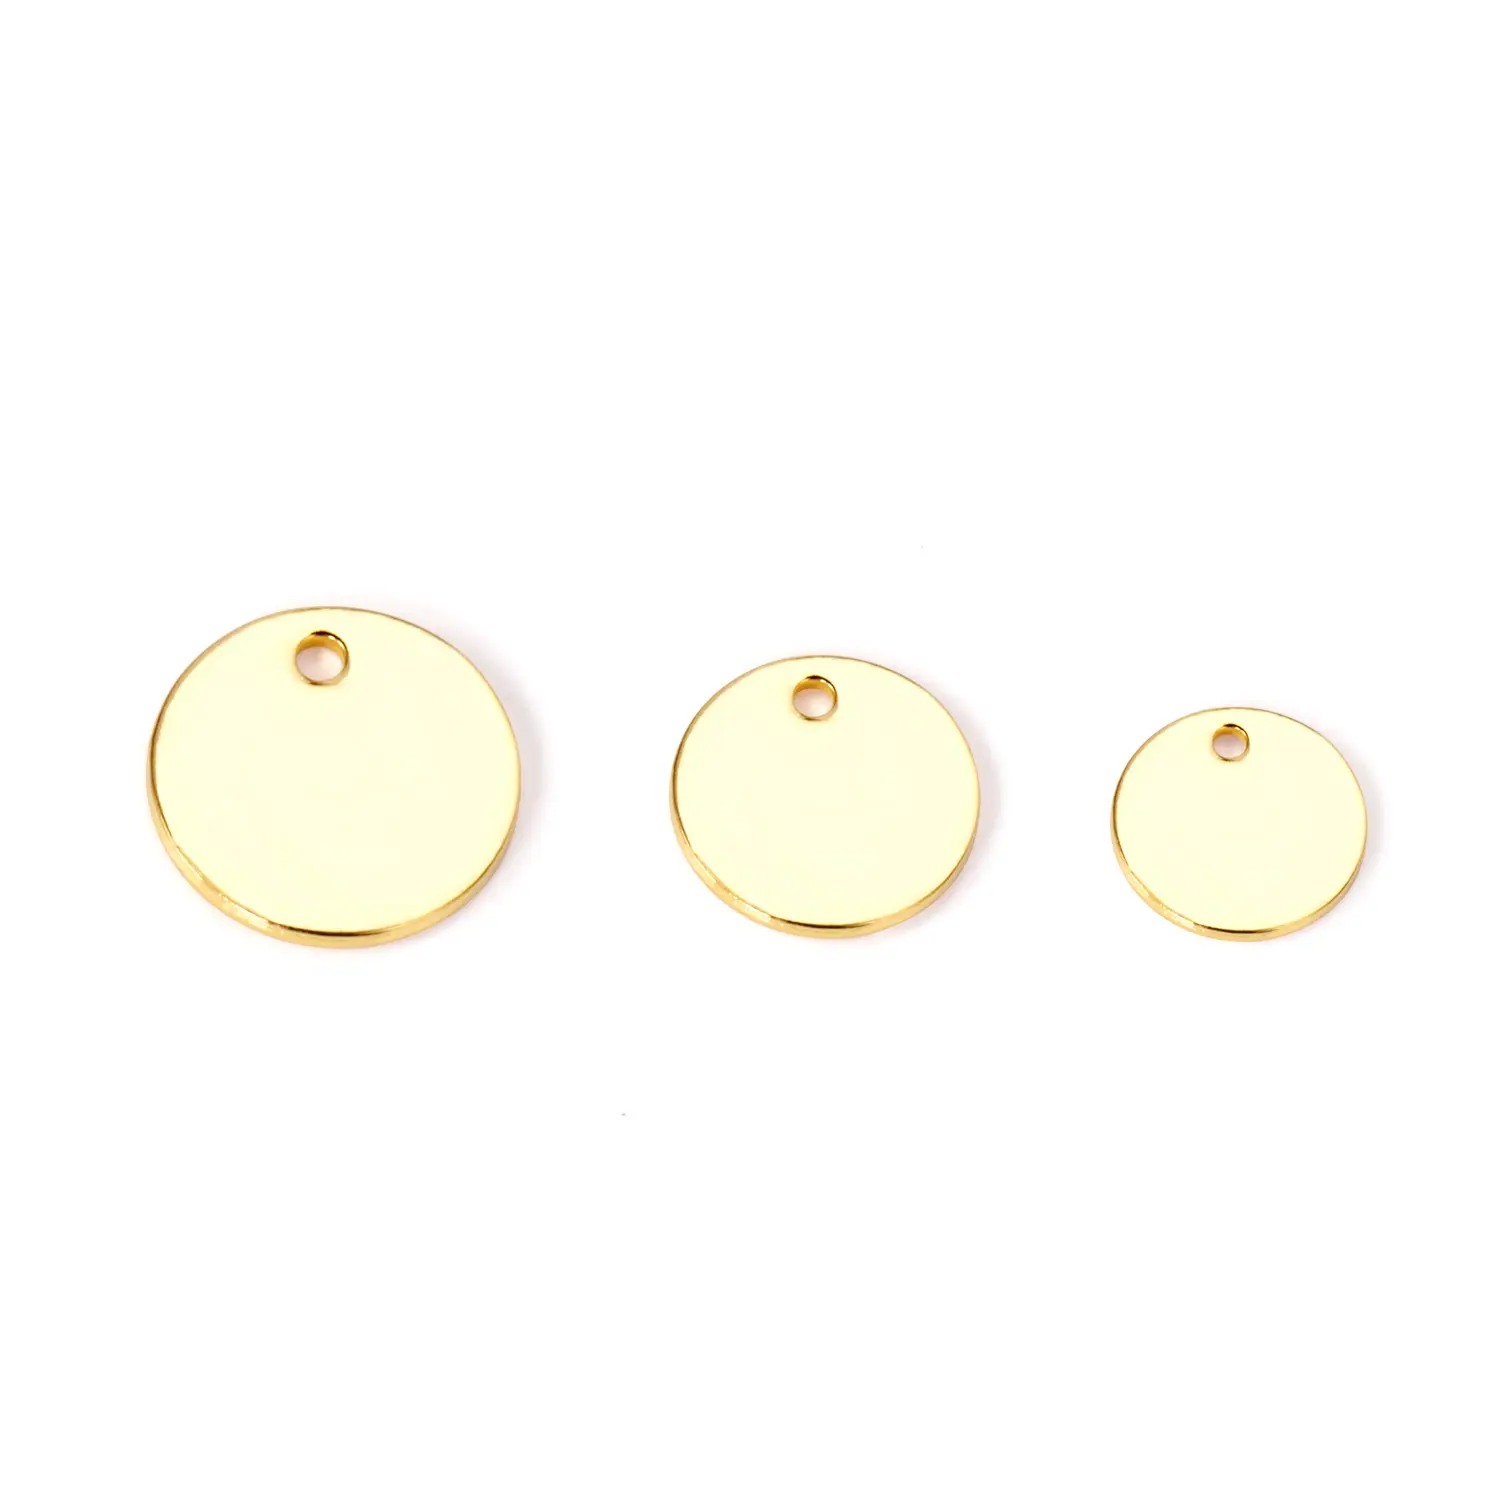 Mix Size Stainless Steel Round Charms Jewelry Spare PartsためDIY Handmade Earring Jewelry Fittings